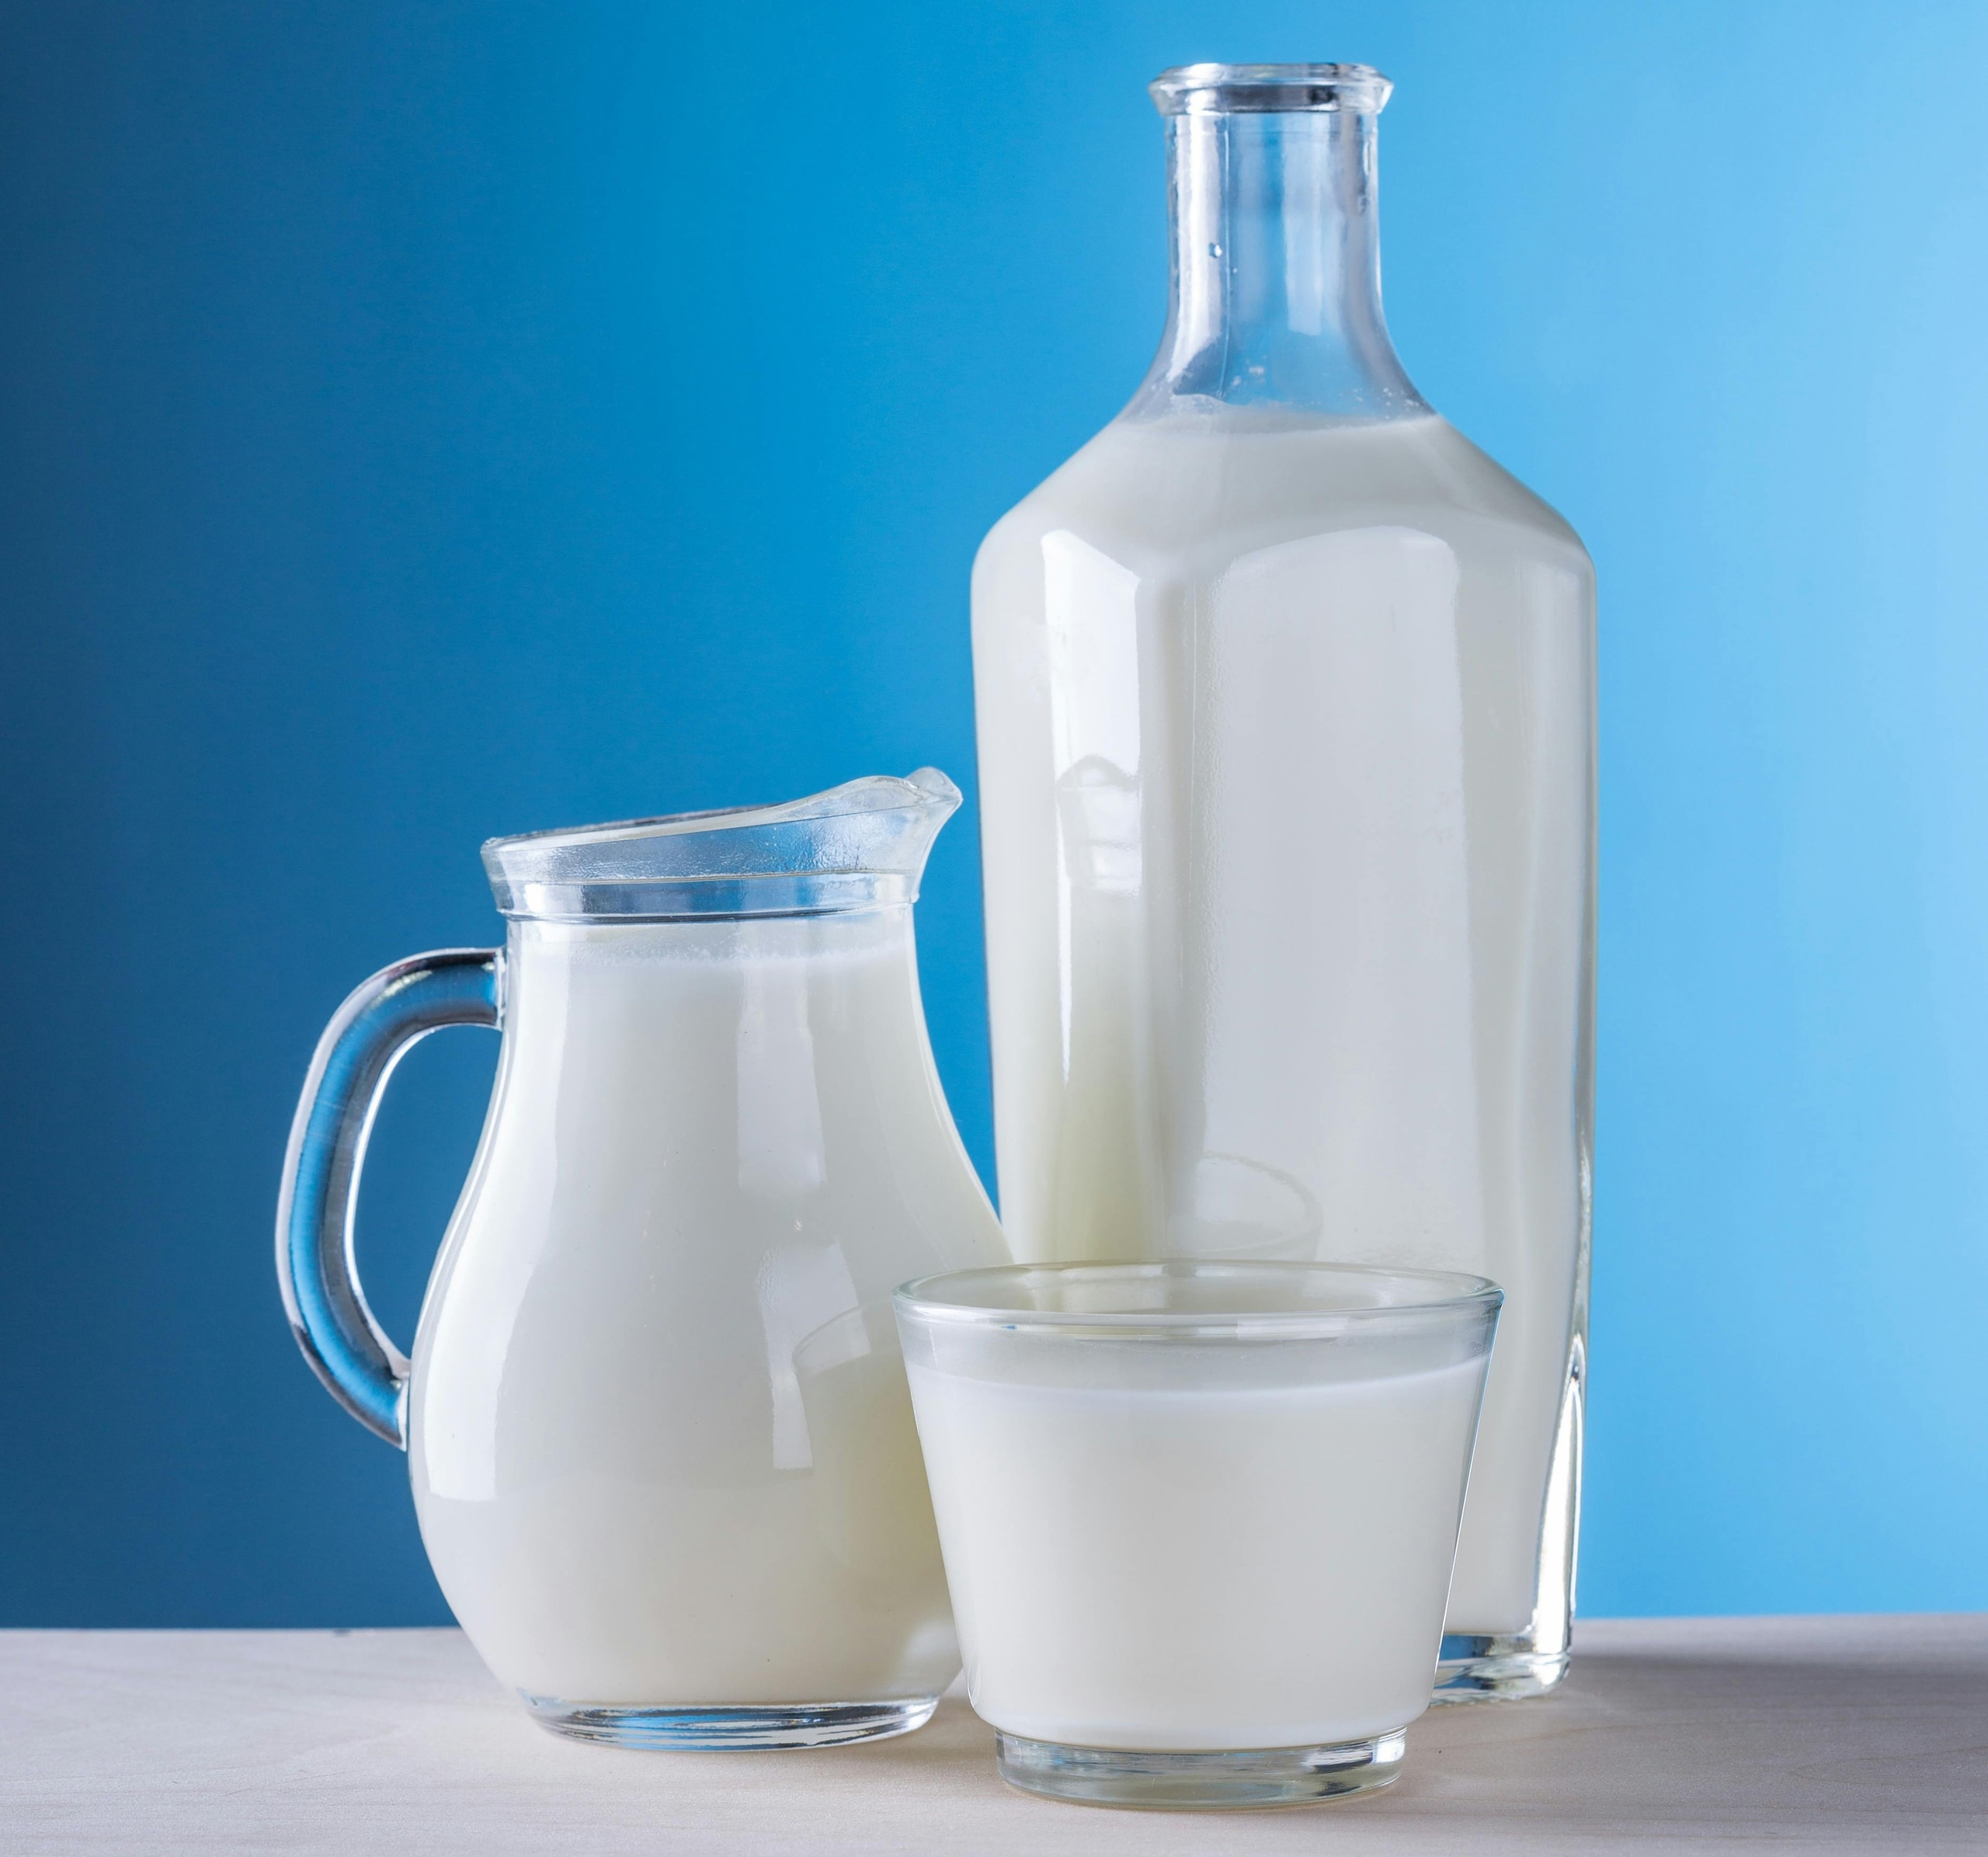 When suffering from indigestion, people should avoid milk and dairy products